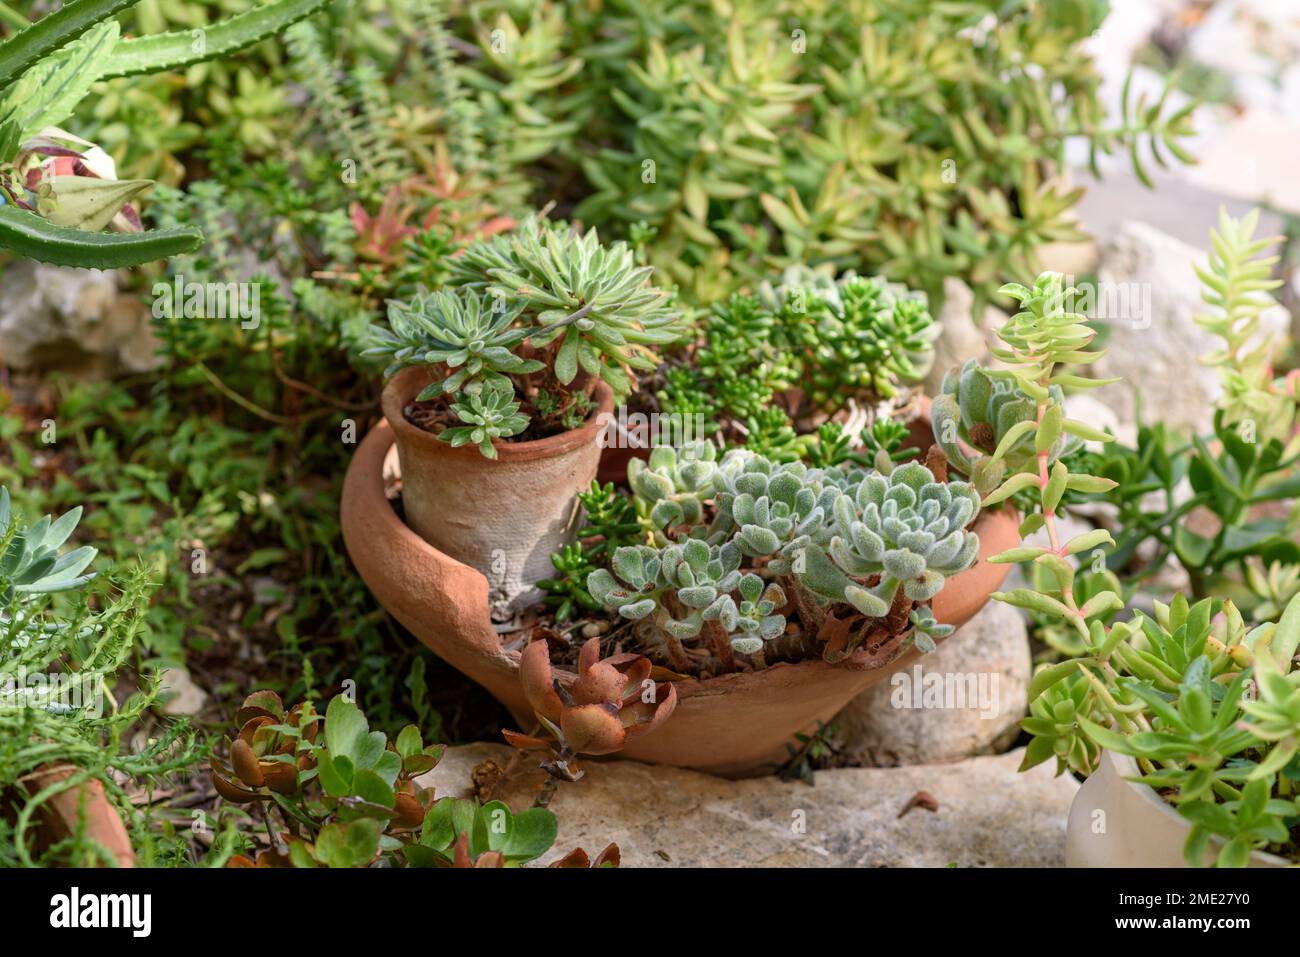 Potted Succulent Plants In A Garden. Close Up Of Succulent Plant In Pot. Stock Photo